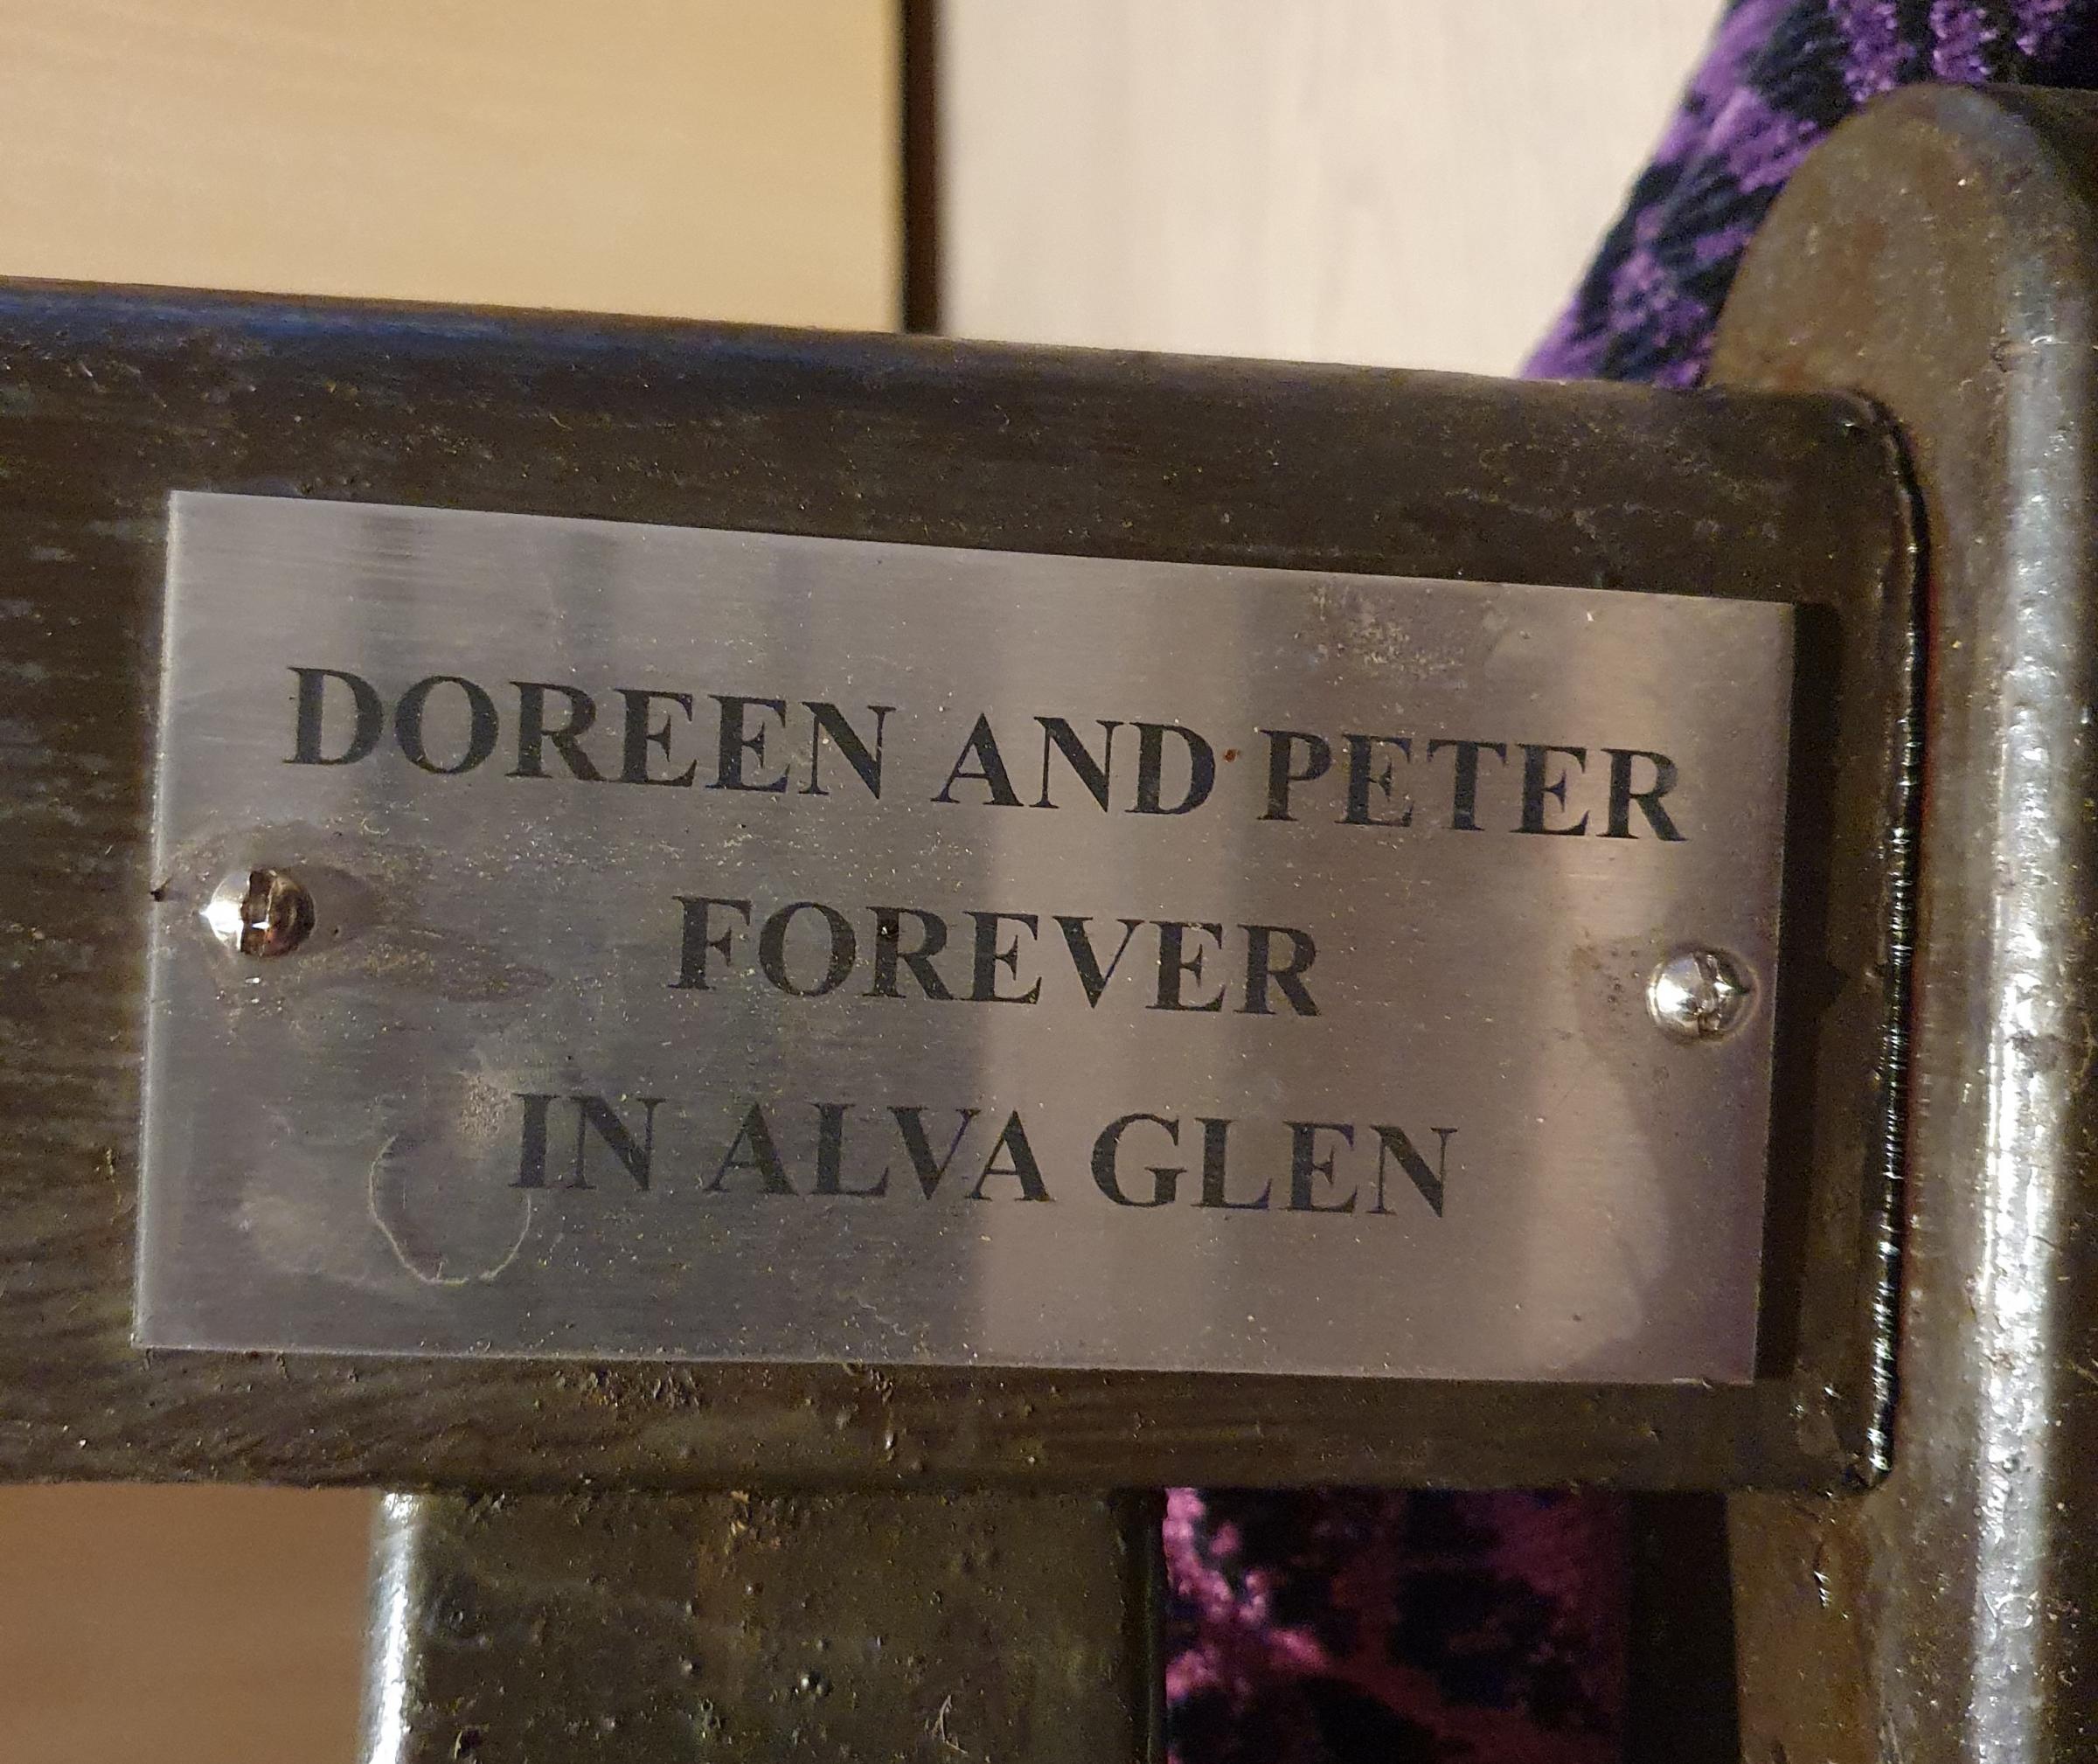 OWNERS SOUGHT: Donna hopes to return this plaque to the rightful family but appeals on social media have so far not identified whom it belongs to